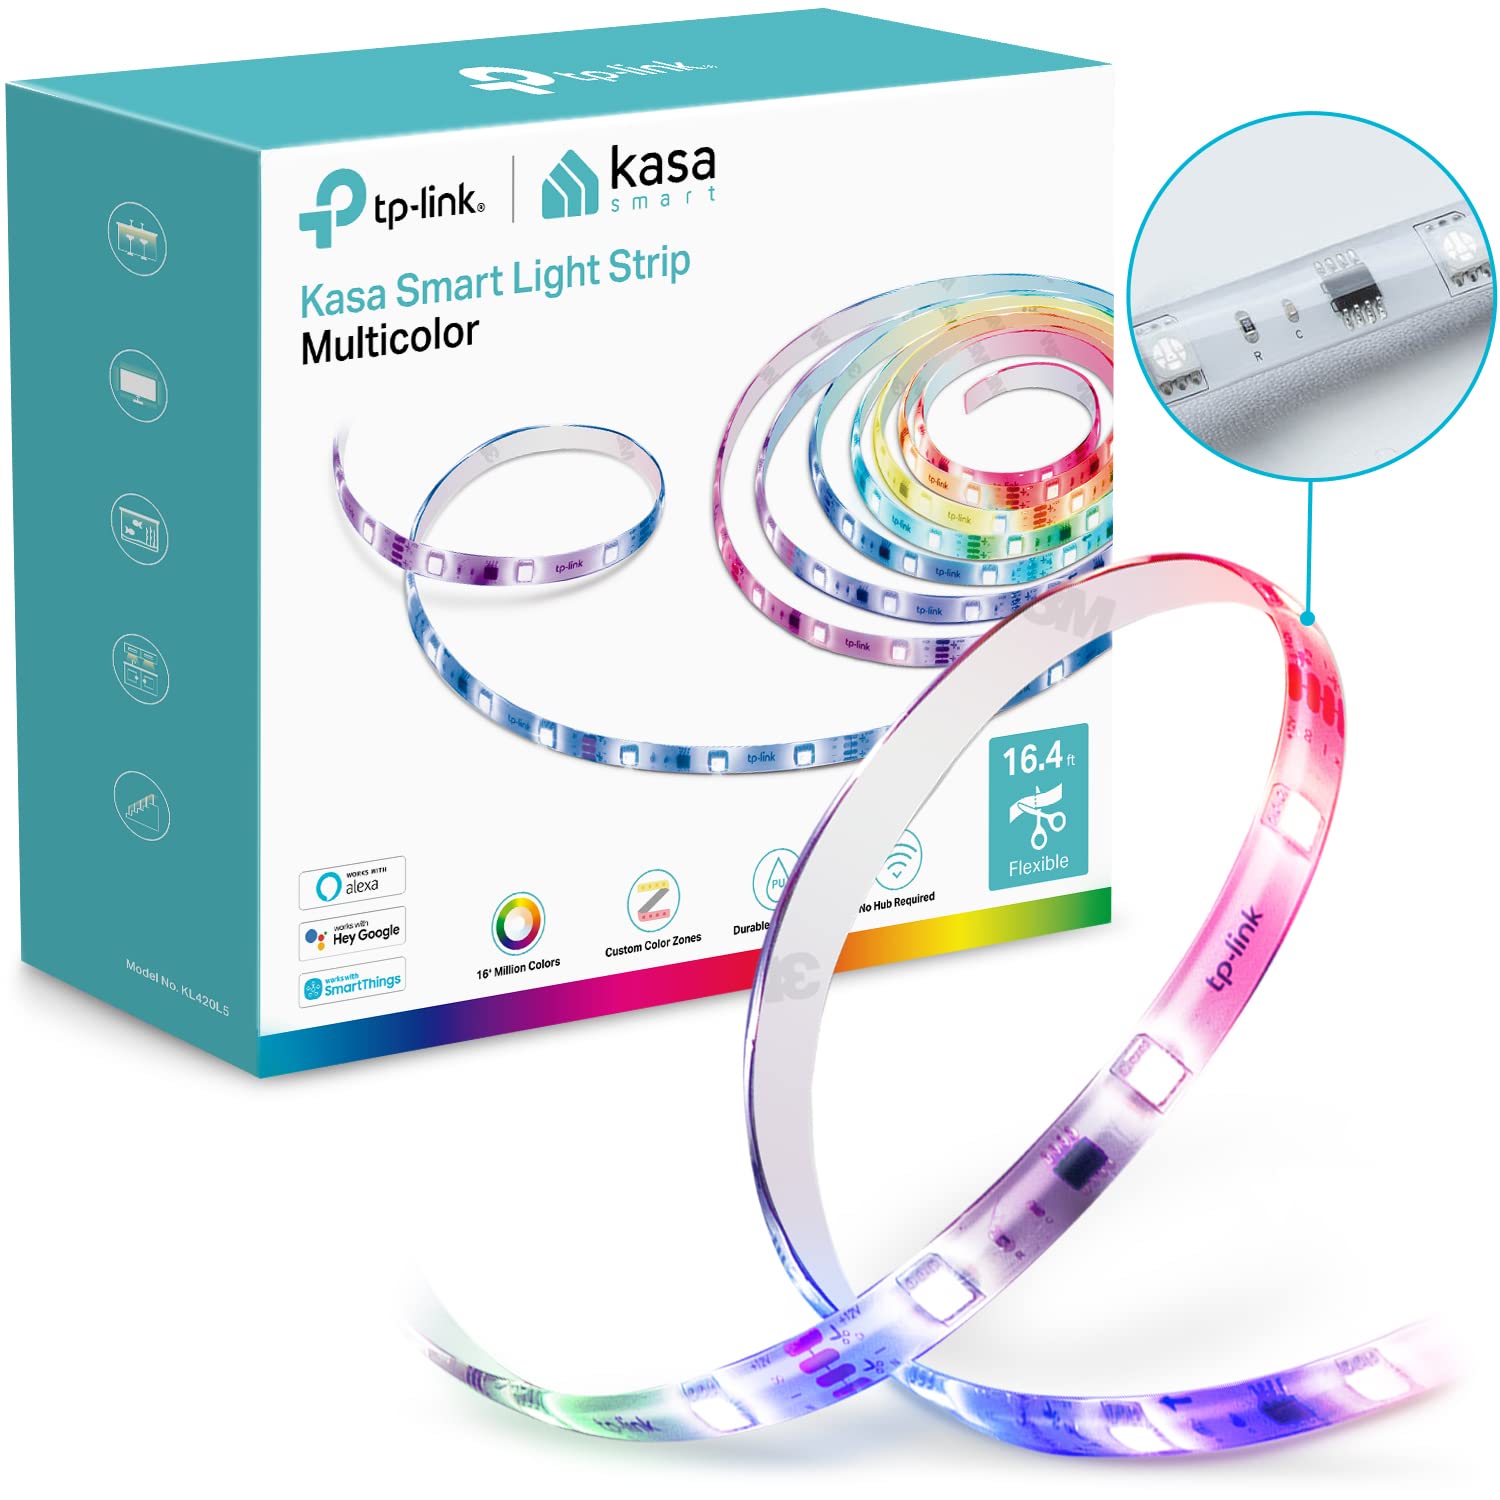 Kasa Smart LED Light Strip, 50 Color Zones RGBIC, 16.4ft Wi-Fi LED Strip Works w/ Alexa, Google Home & SmartThings, High Brightness, 16M Colors, PU Coating, Trimmable, 2 Yr Warranty (KL420L5)